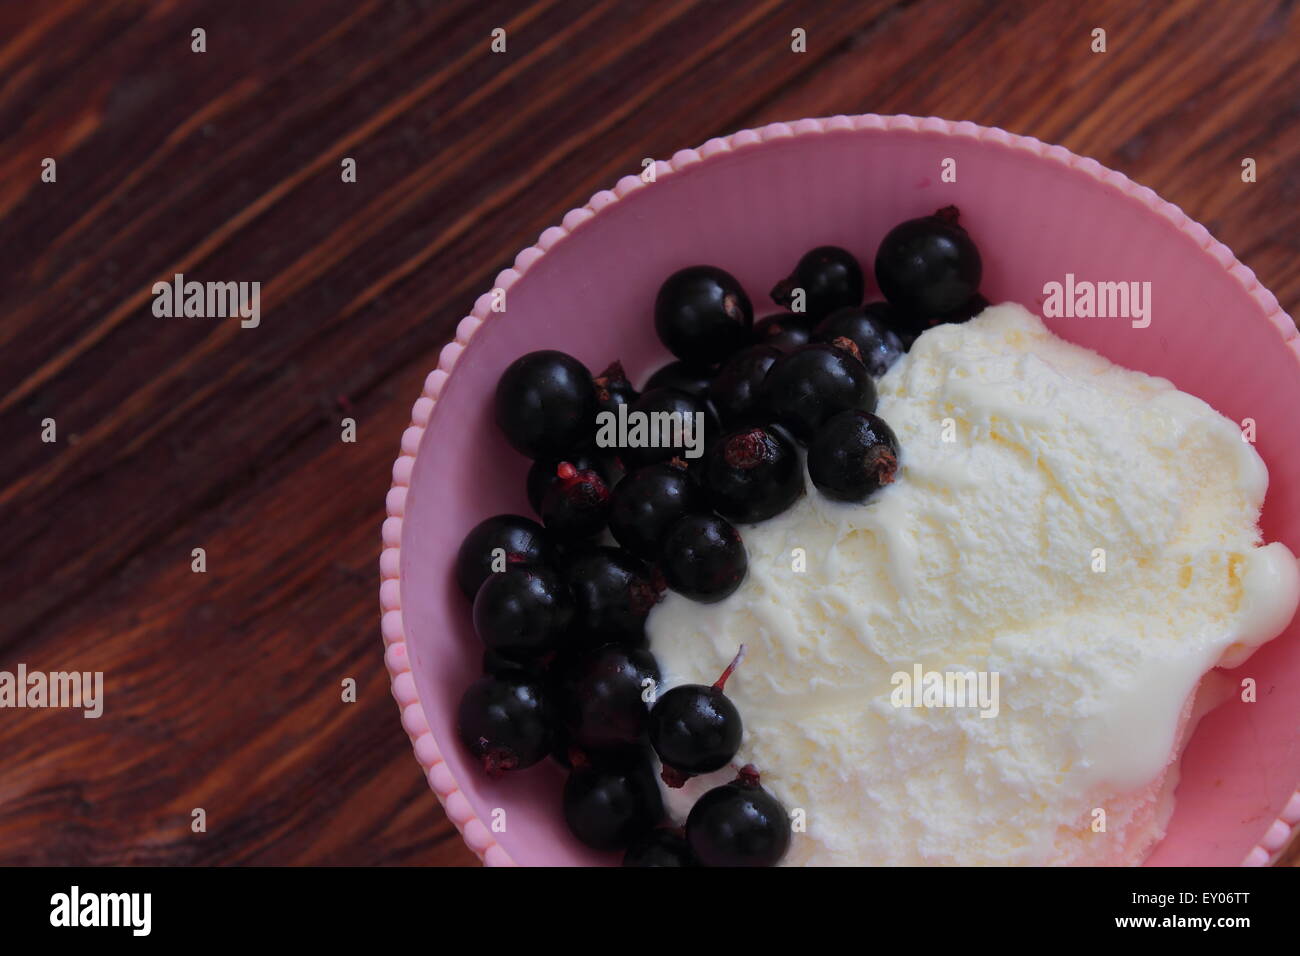 on a wooden board sweet dessert of ice cream with black currant Stock Photo